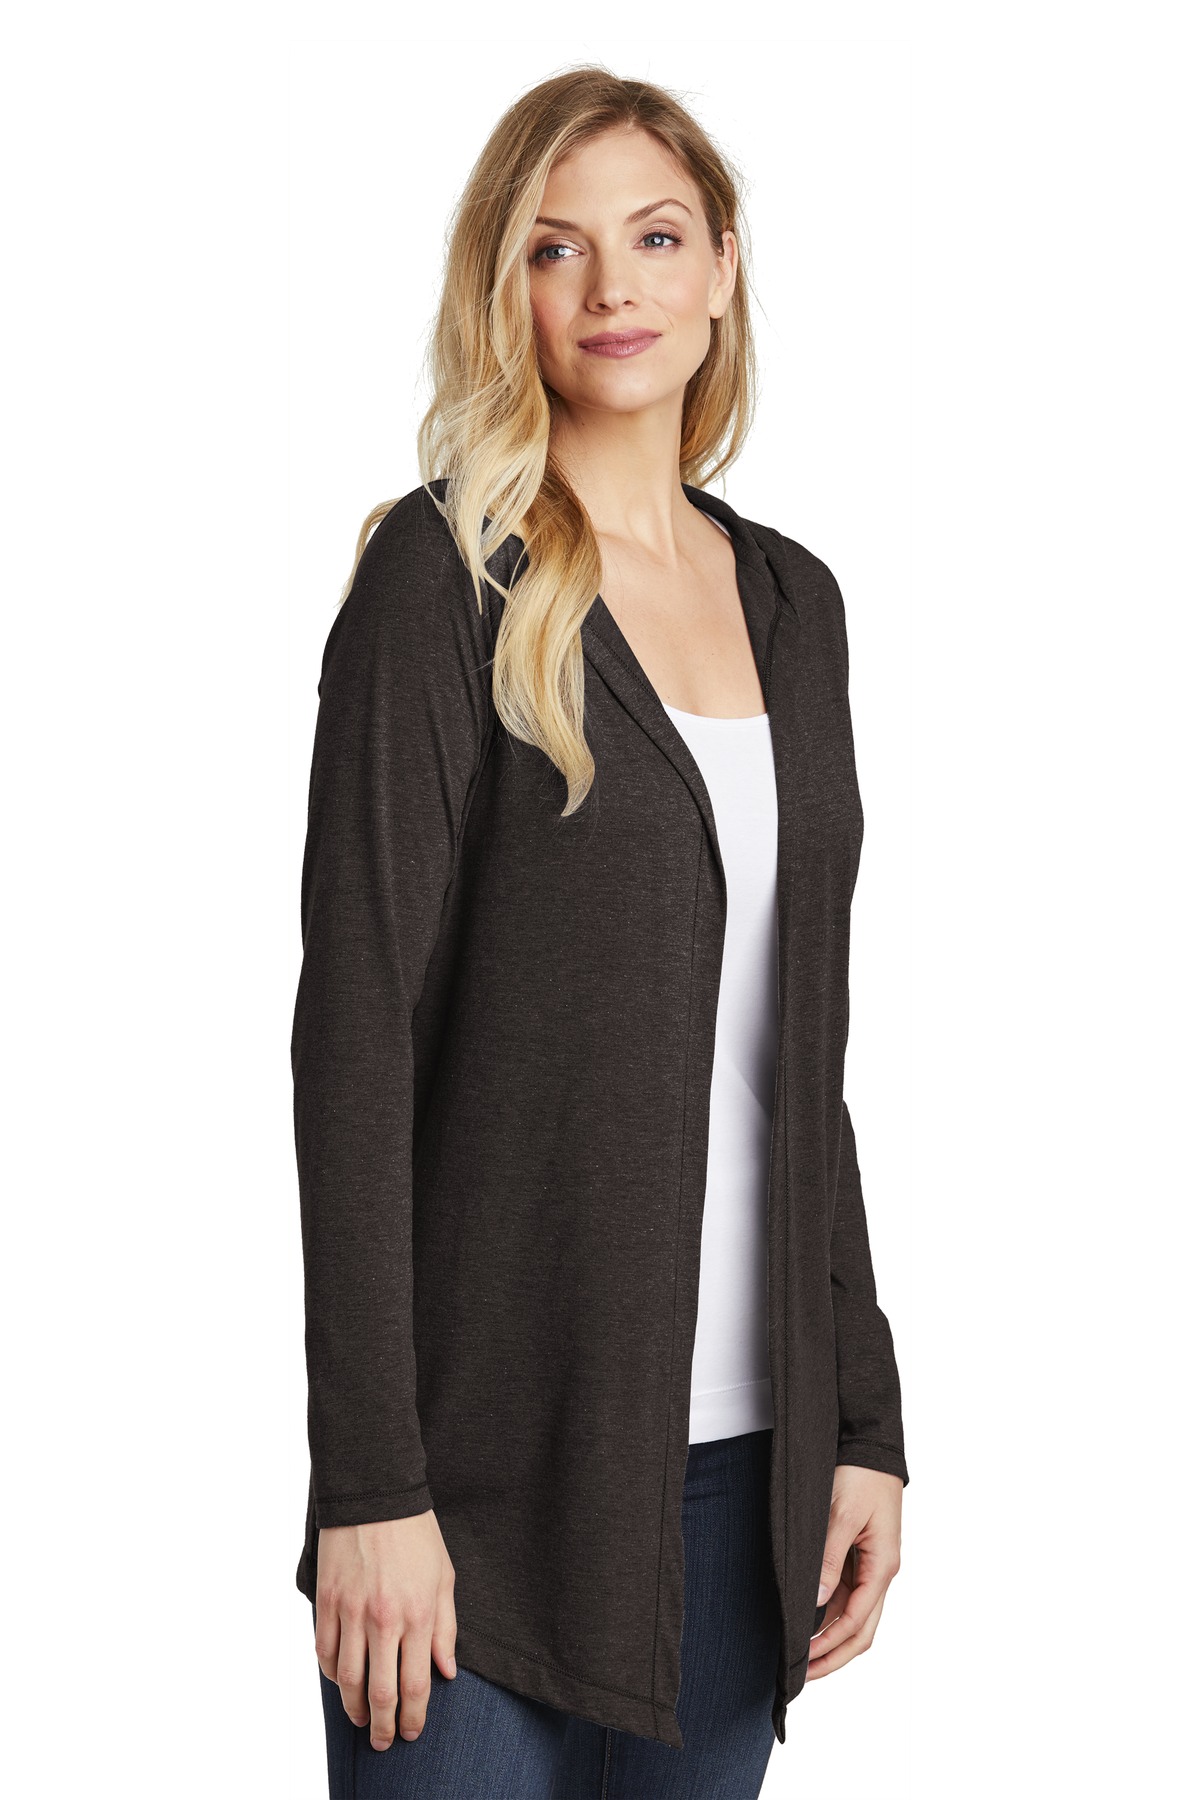 District Women's Perfect Tri Hooded Cardigan. DT156 | Blank Apparel by ZOME